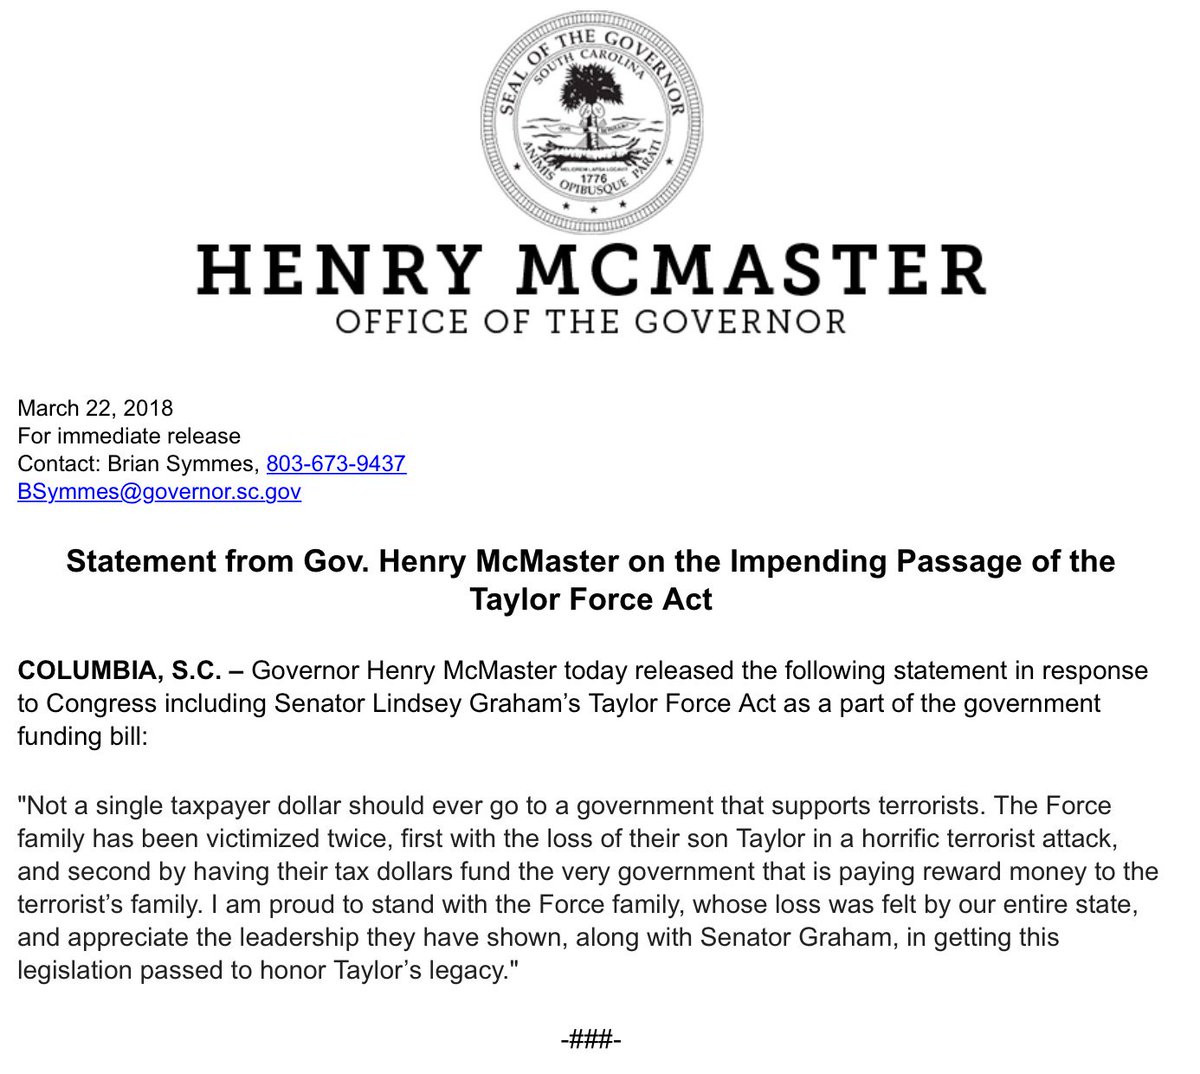 South Carolina Governor @henrymcmaster comes out in support of the #TaylorForceAct.